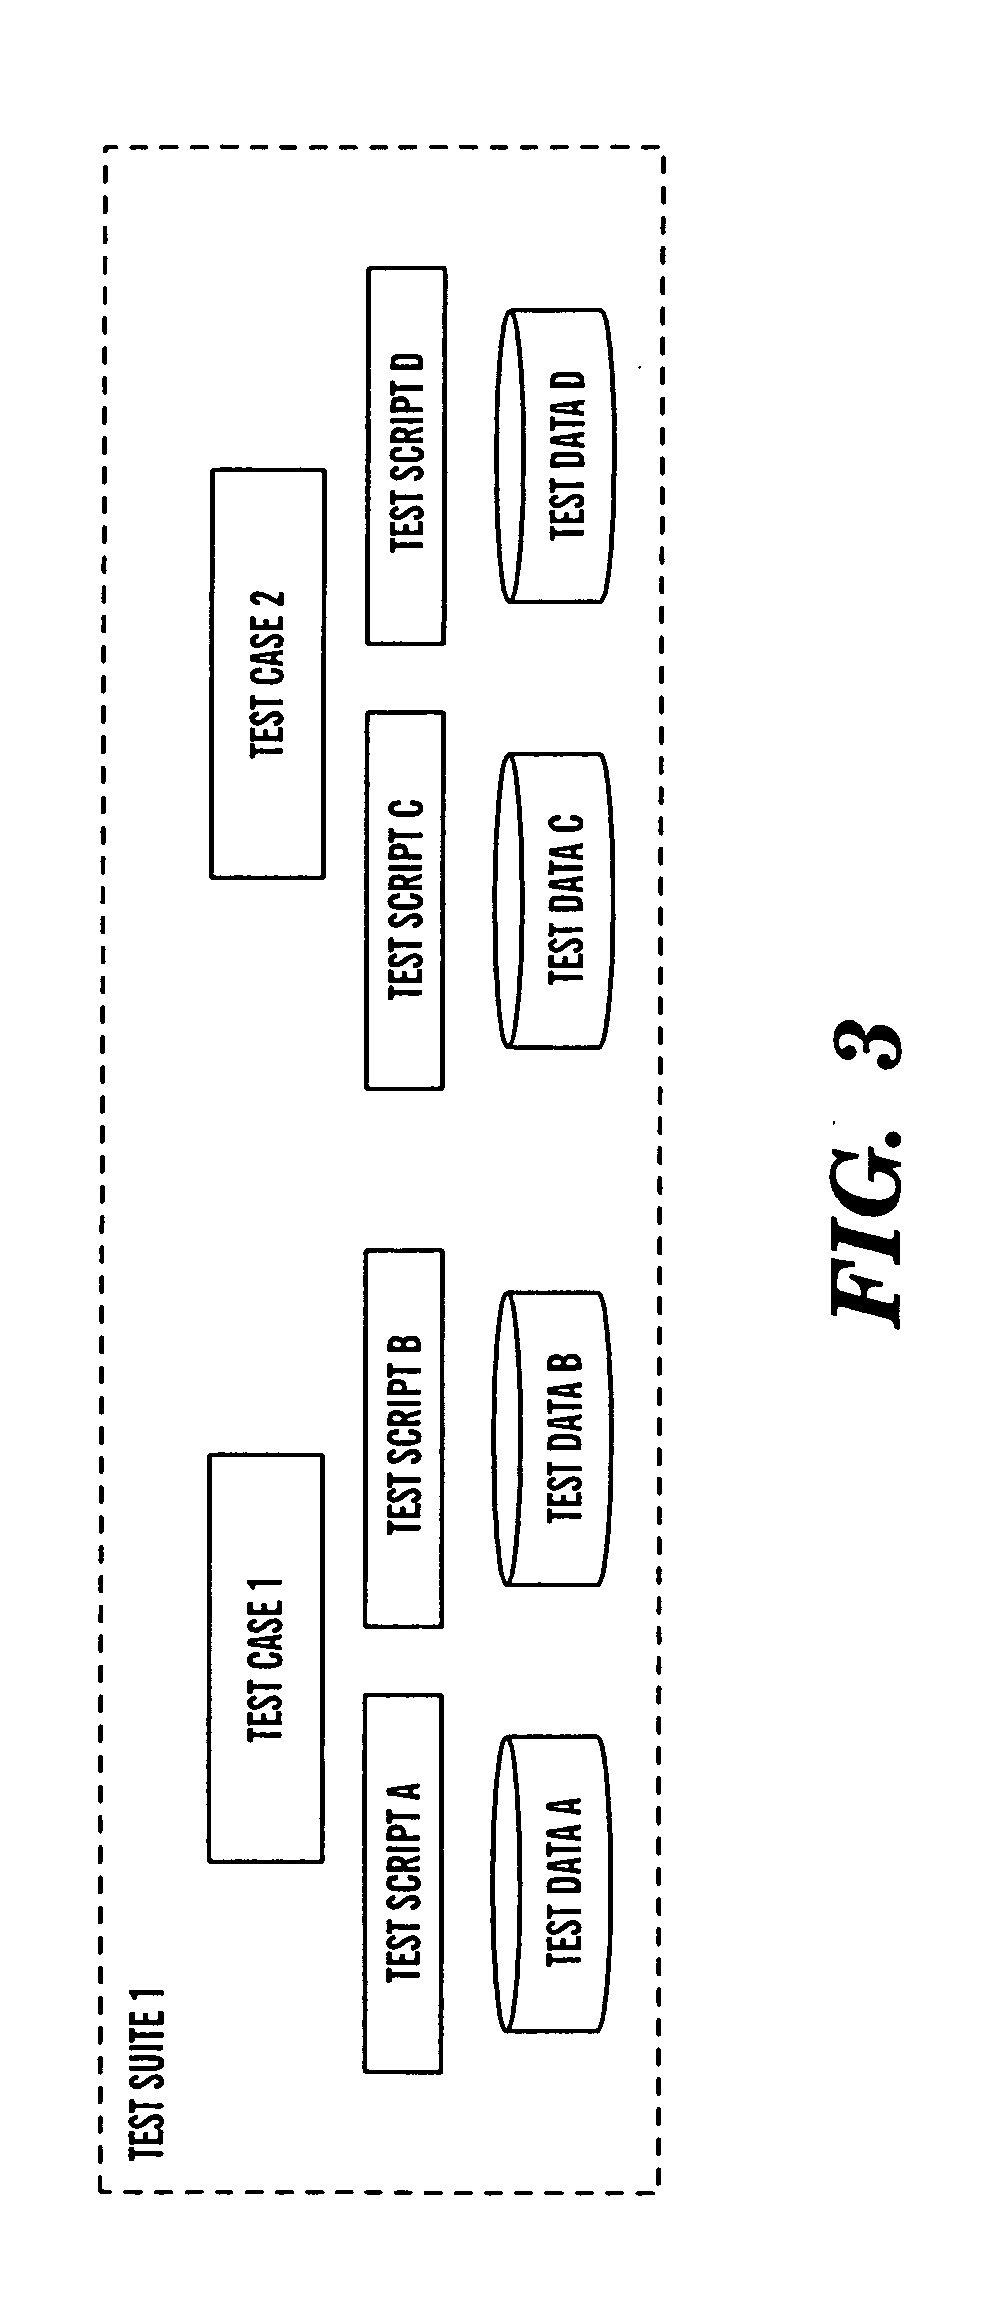 Method and system for testing a software application interfacing with multiple external software applications in a simulated test environment